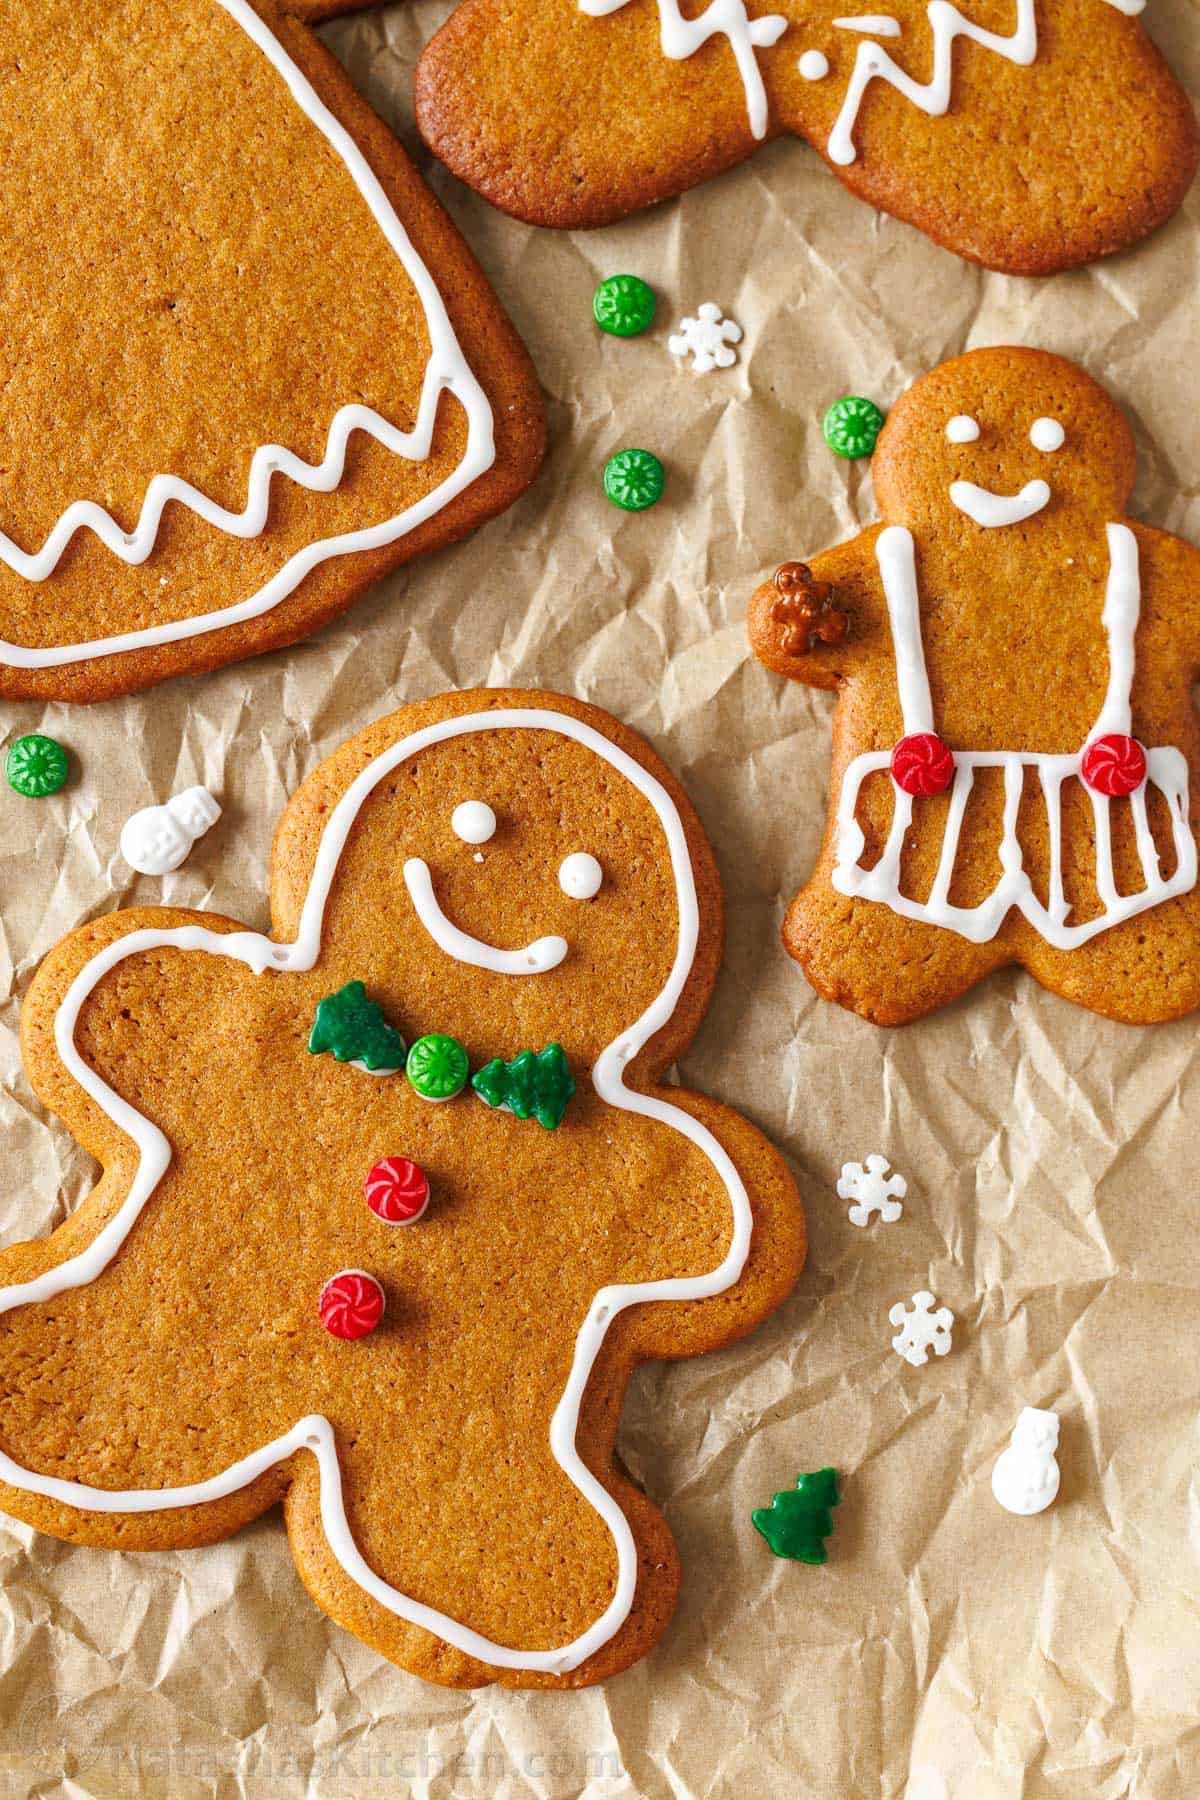 Gingerbread men cookie recipe with homemade icing and holiday candies